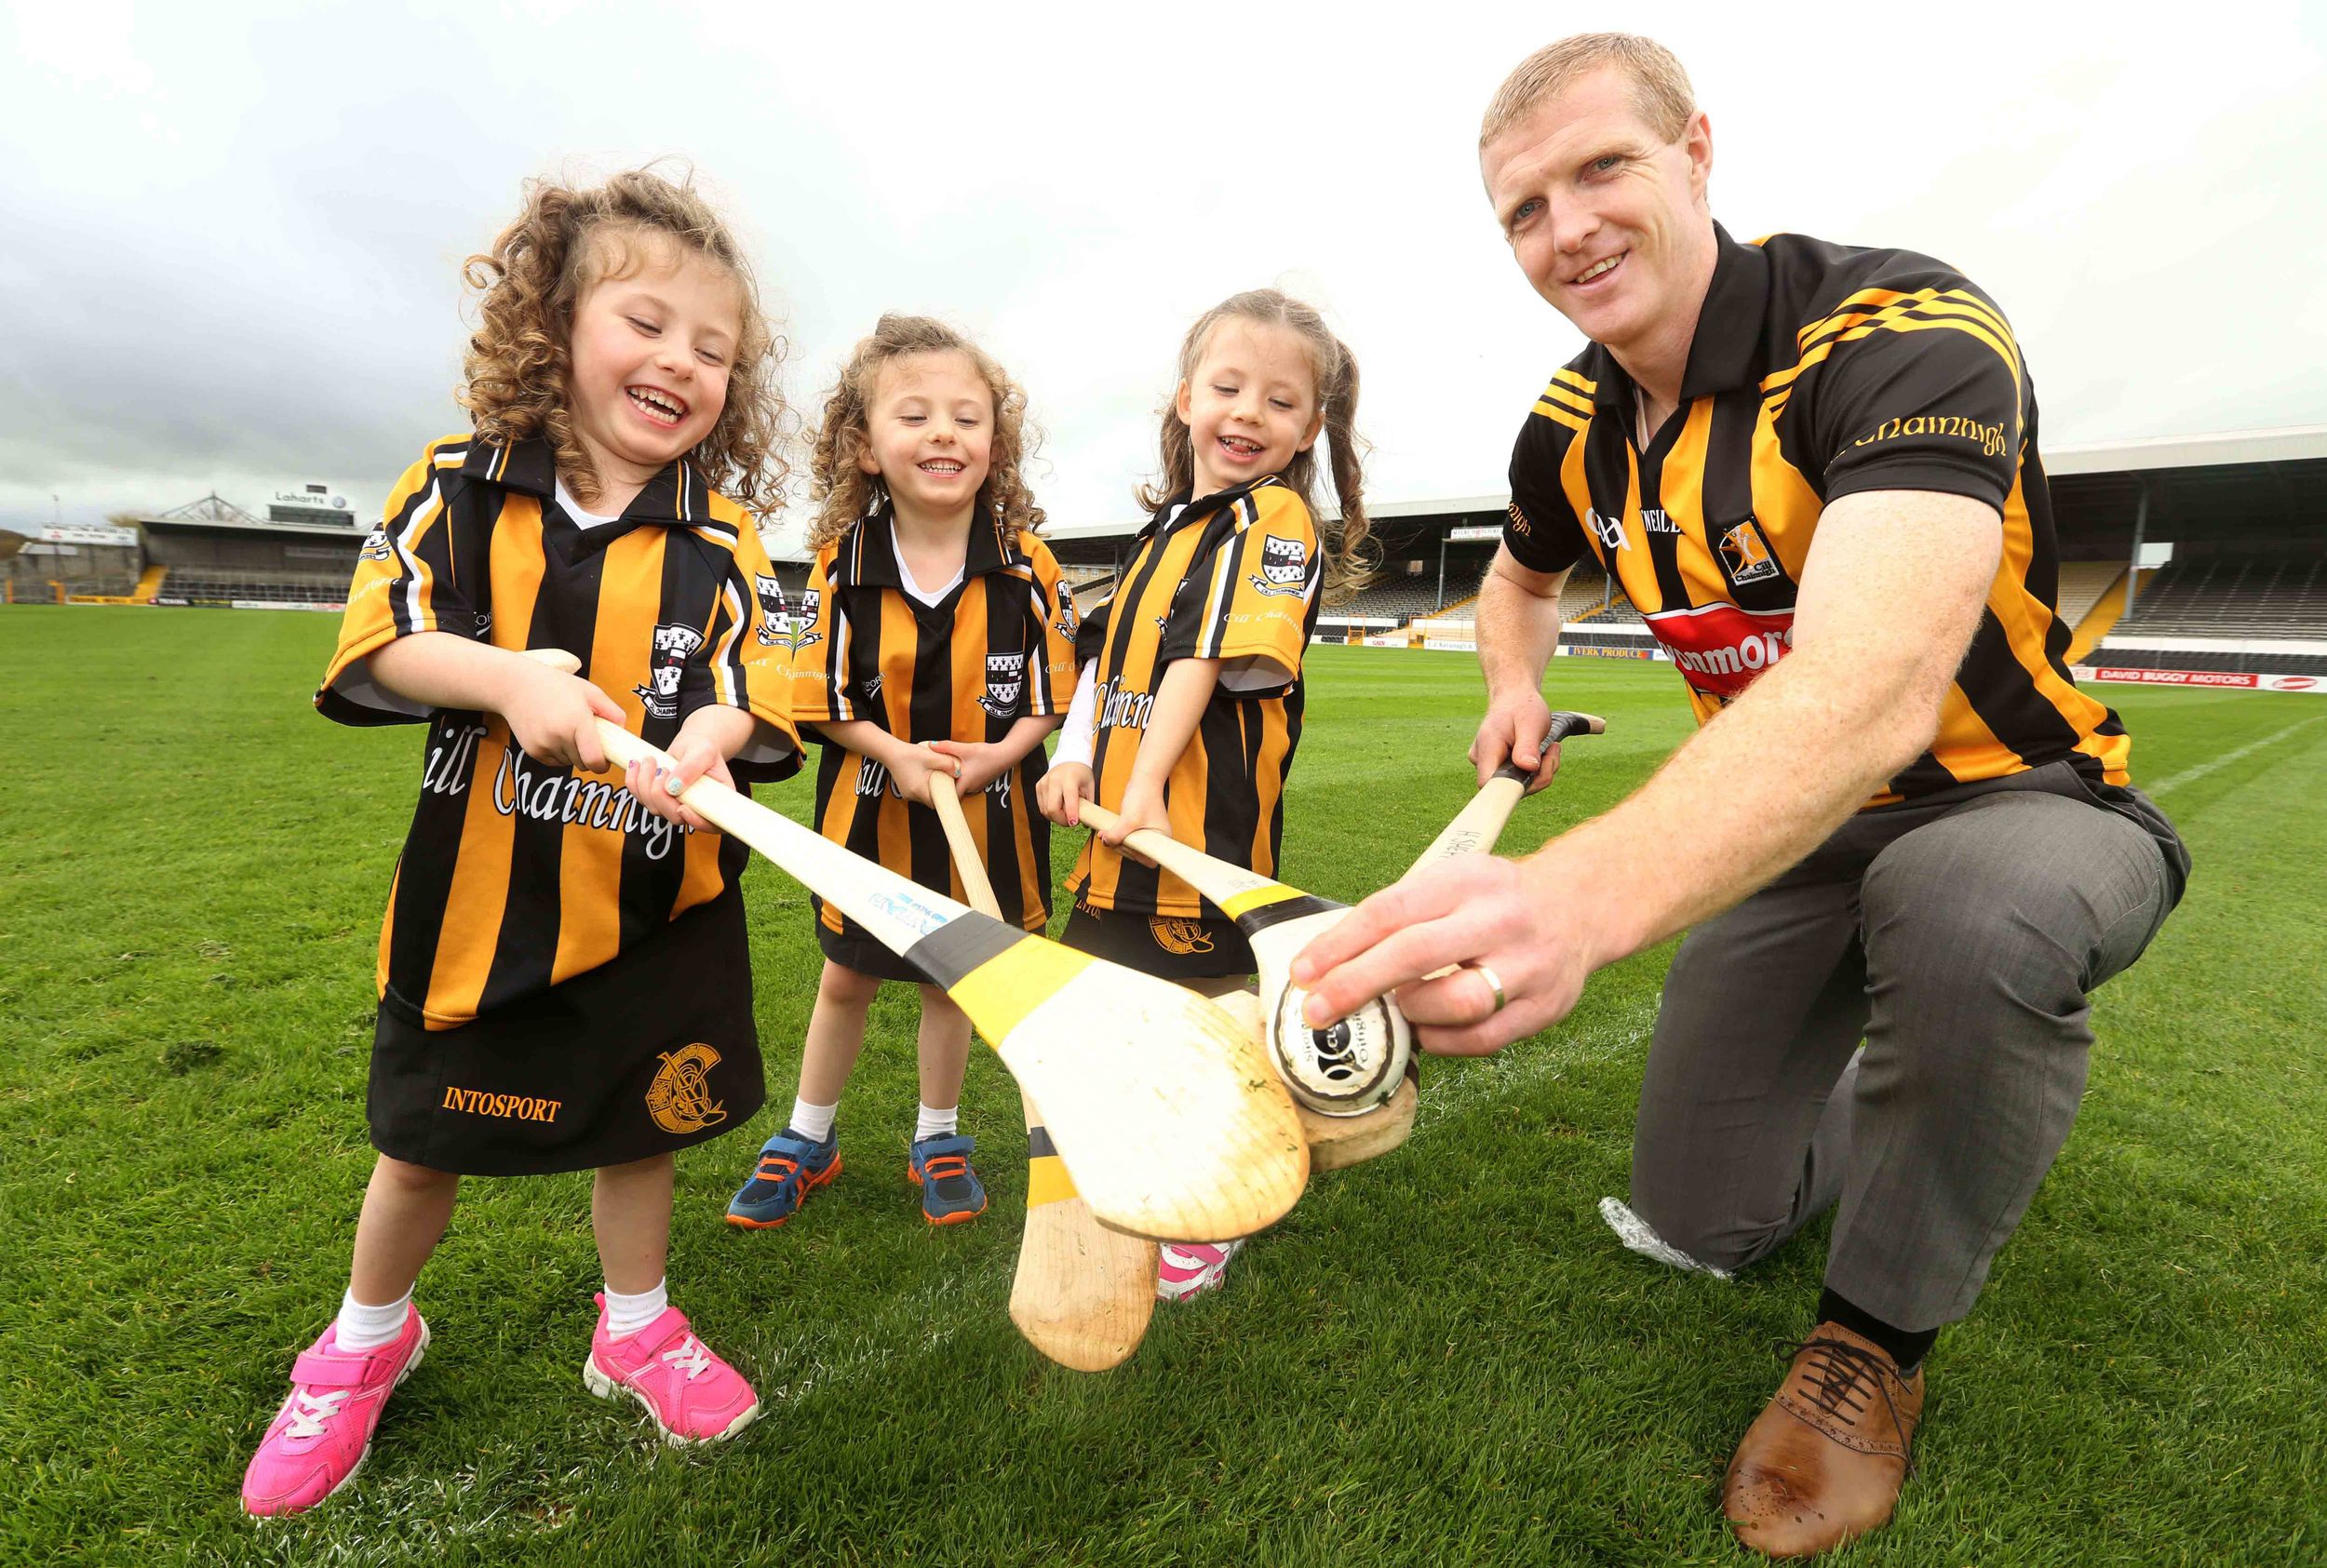  Kilkenny Hurling star Henry Shefflin and Tynan triplets launch the Friends of The Coombe charity calendar 